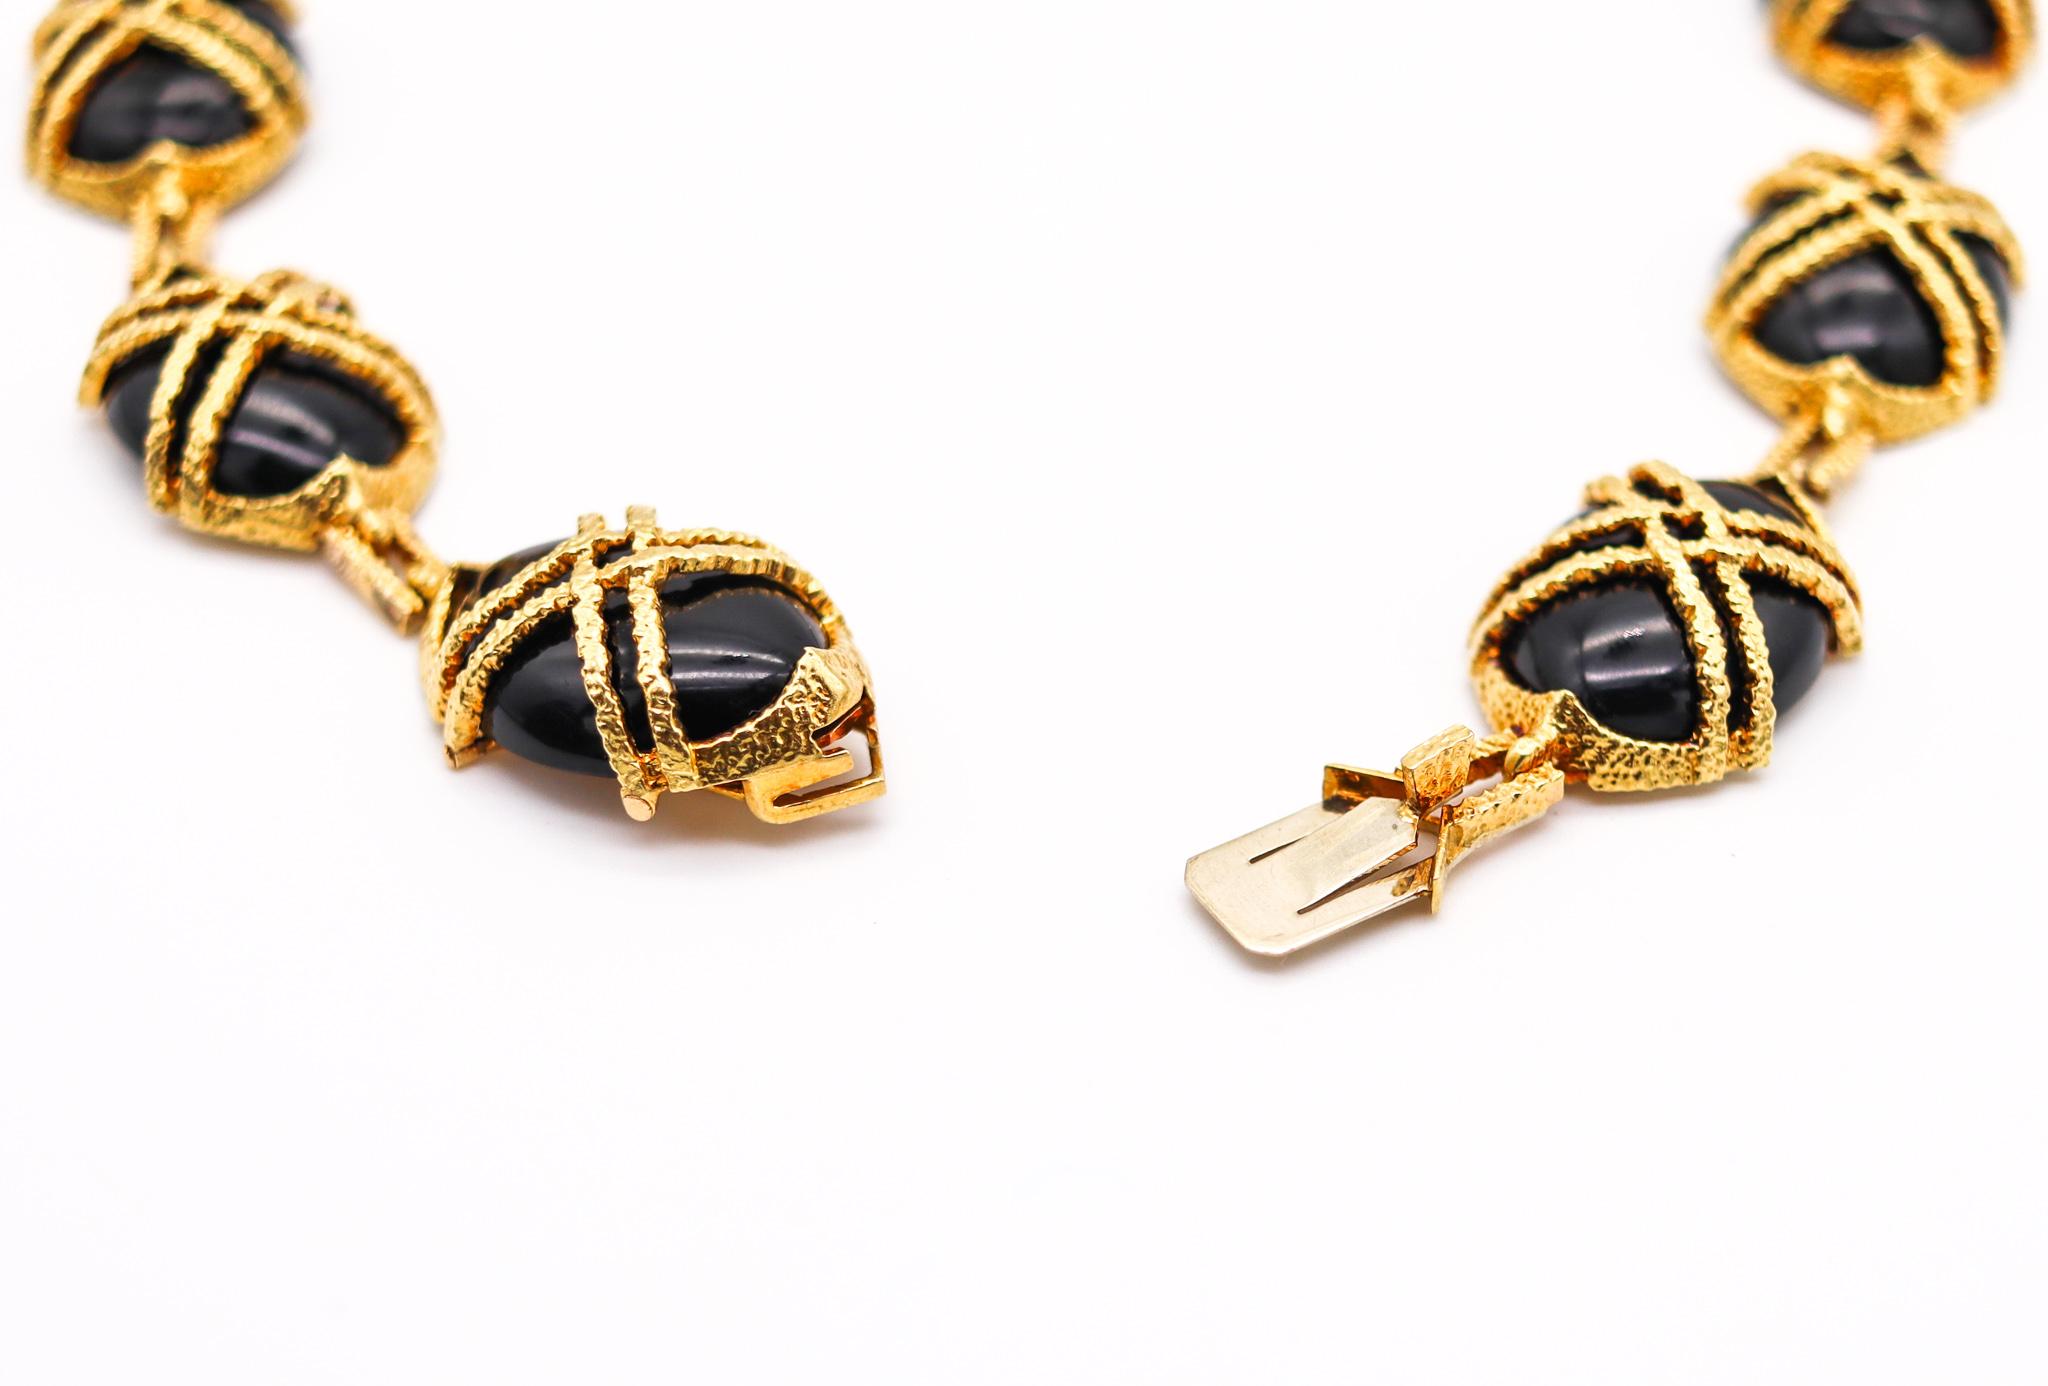 Cabochon Cartier 1969 Retro Modernist Necklace & Earring Suite in 18kt Gold & Black Jade